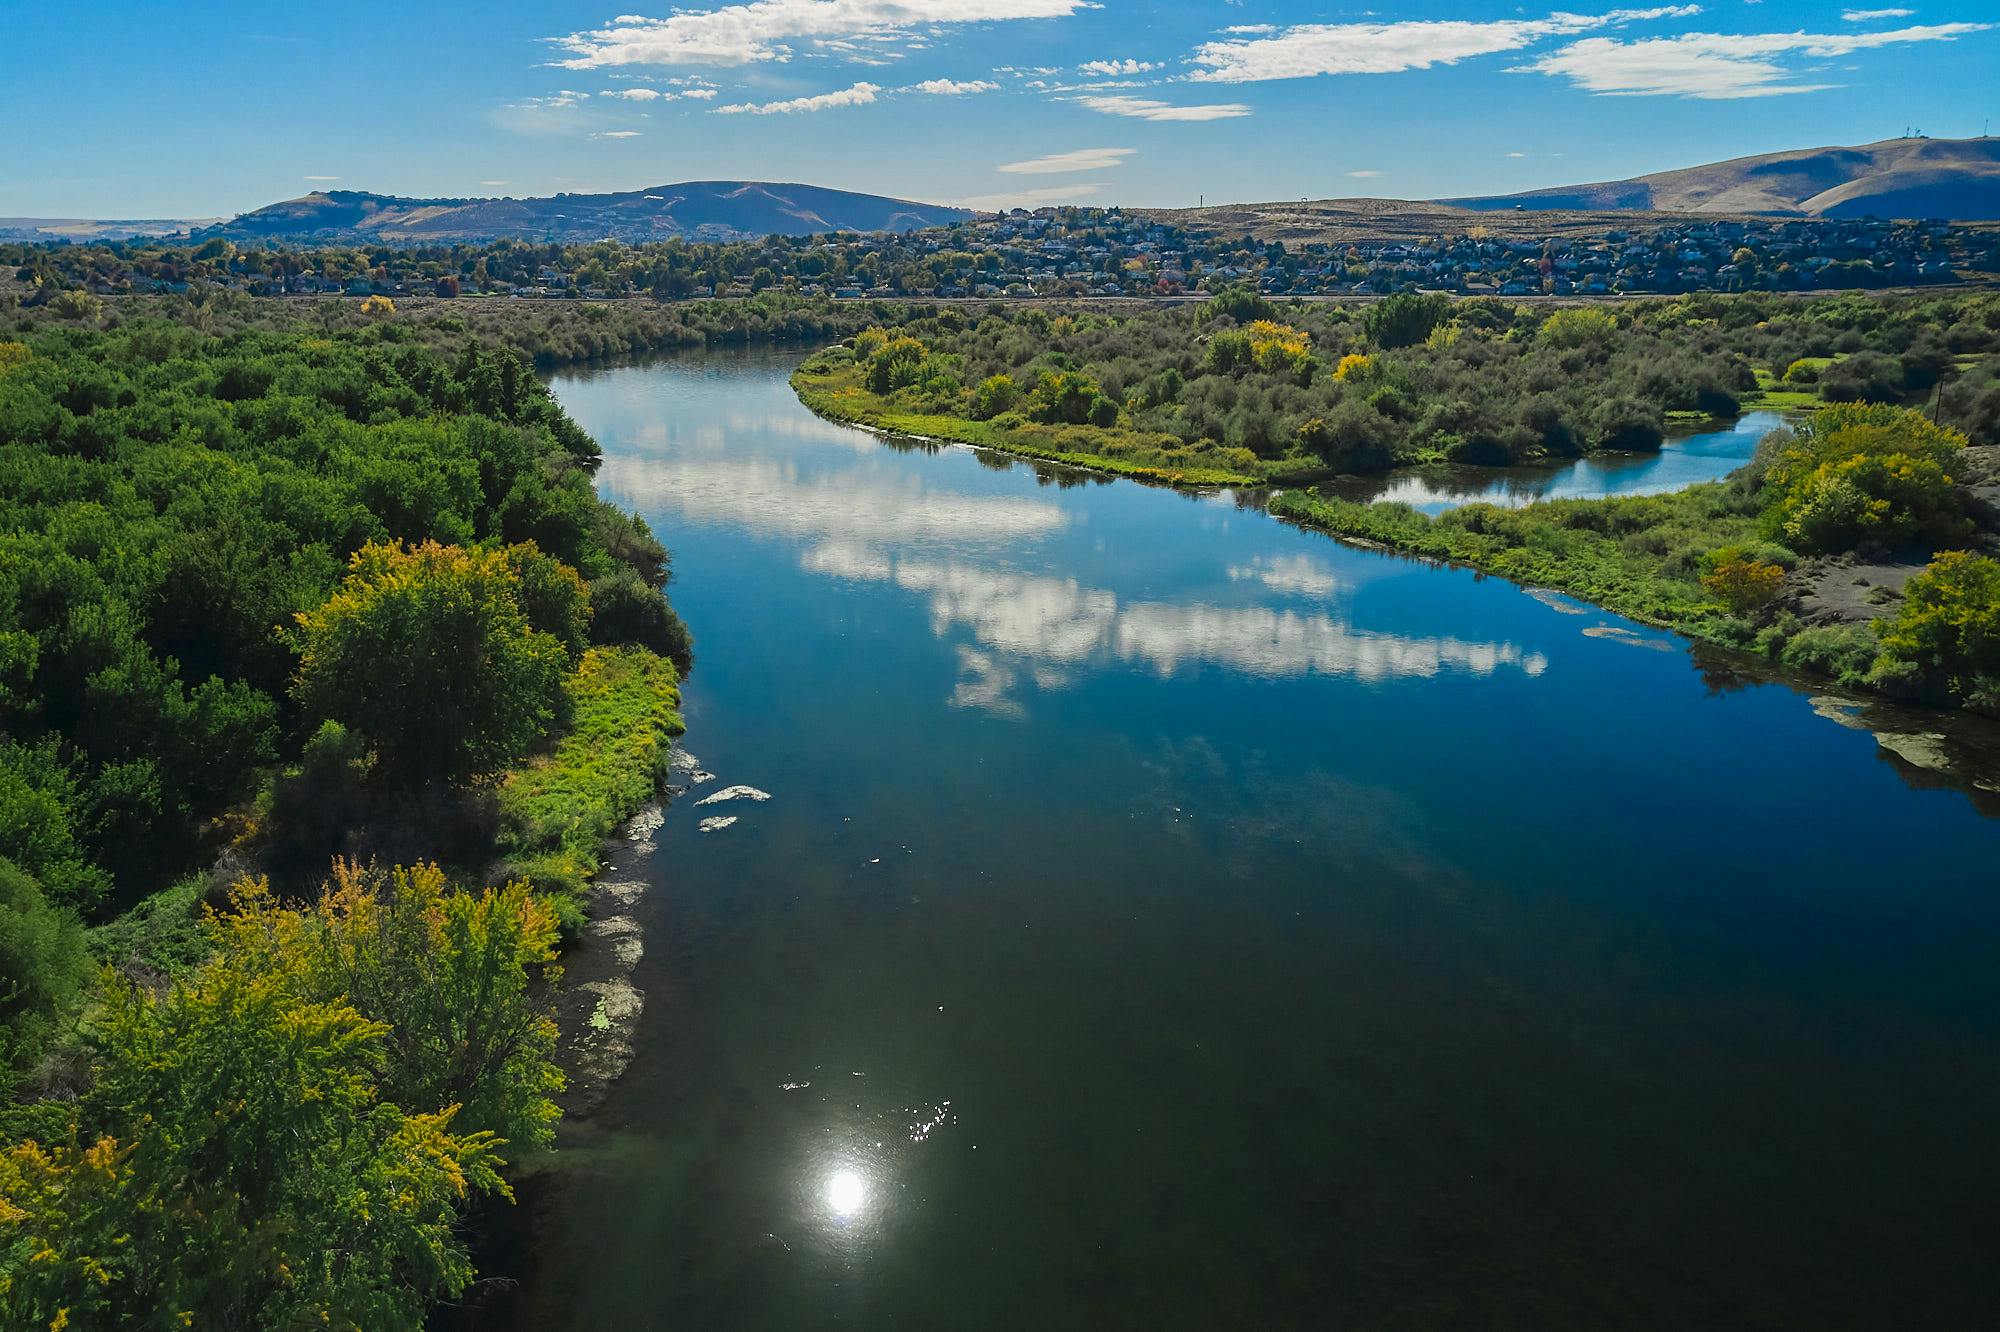 Done photo of the Snake River in Tri-Cities Washington